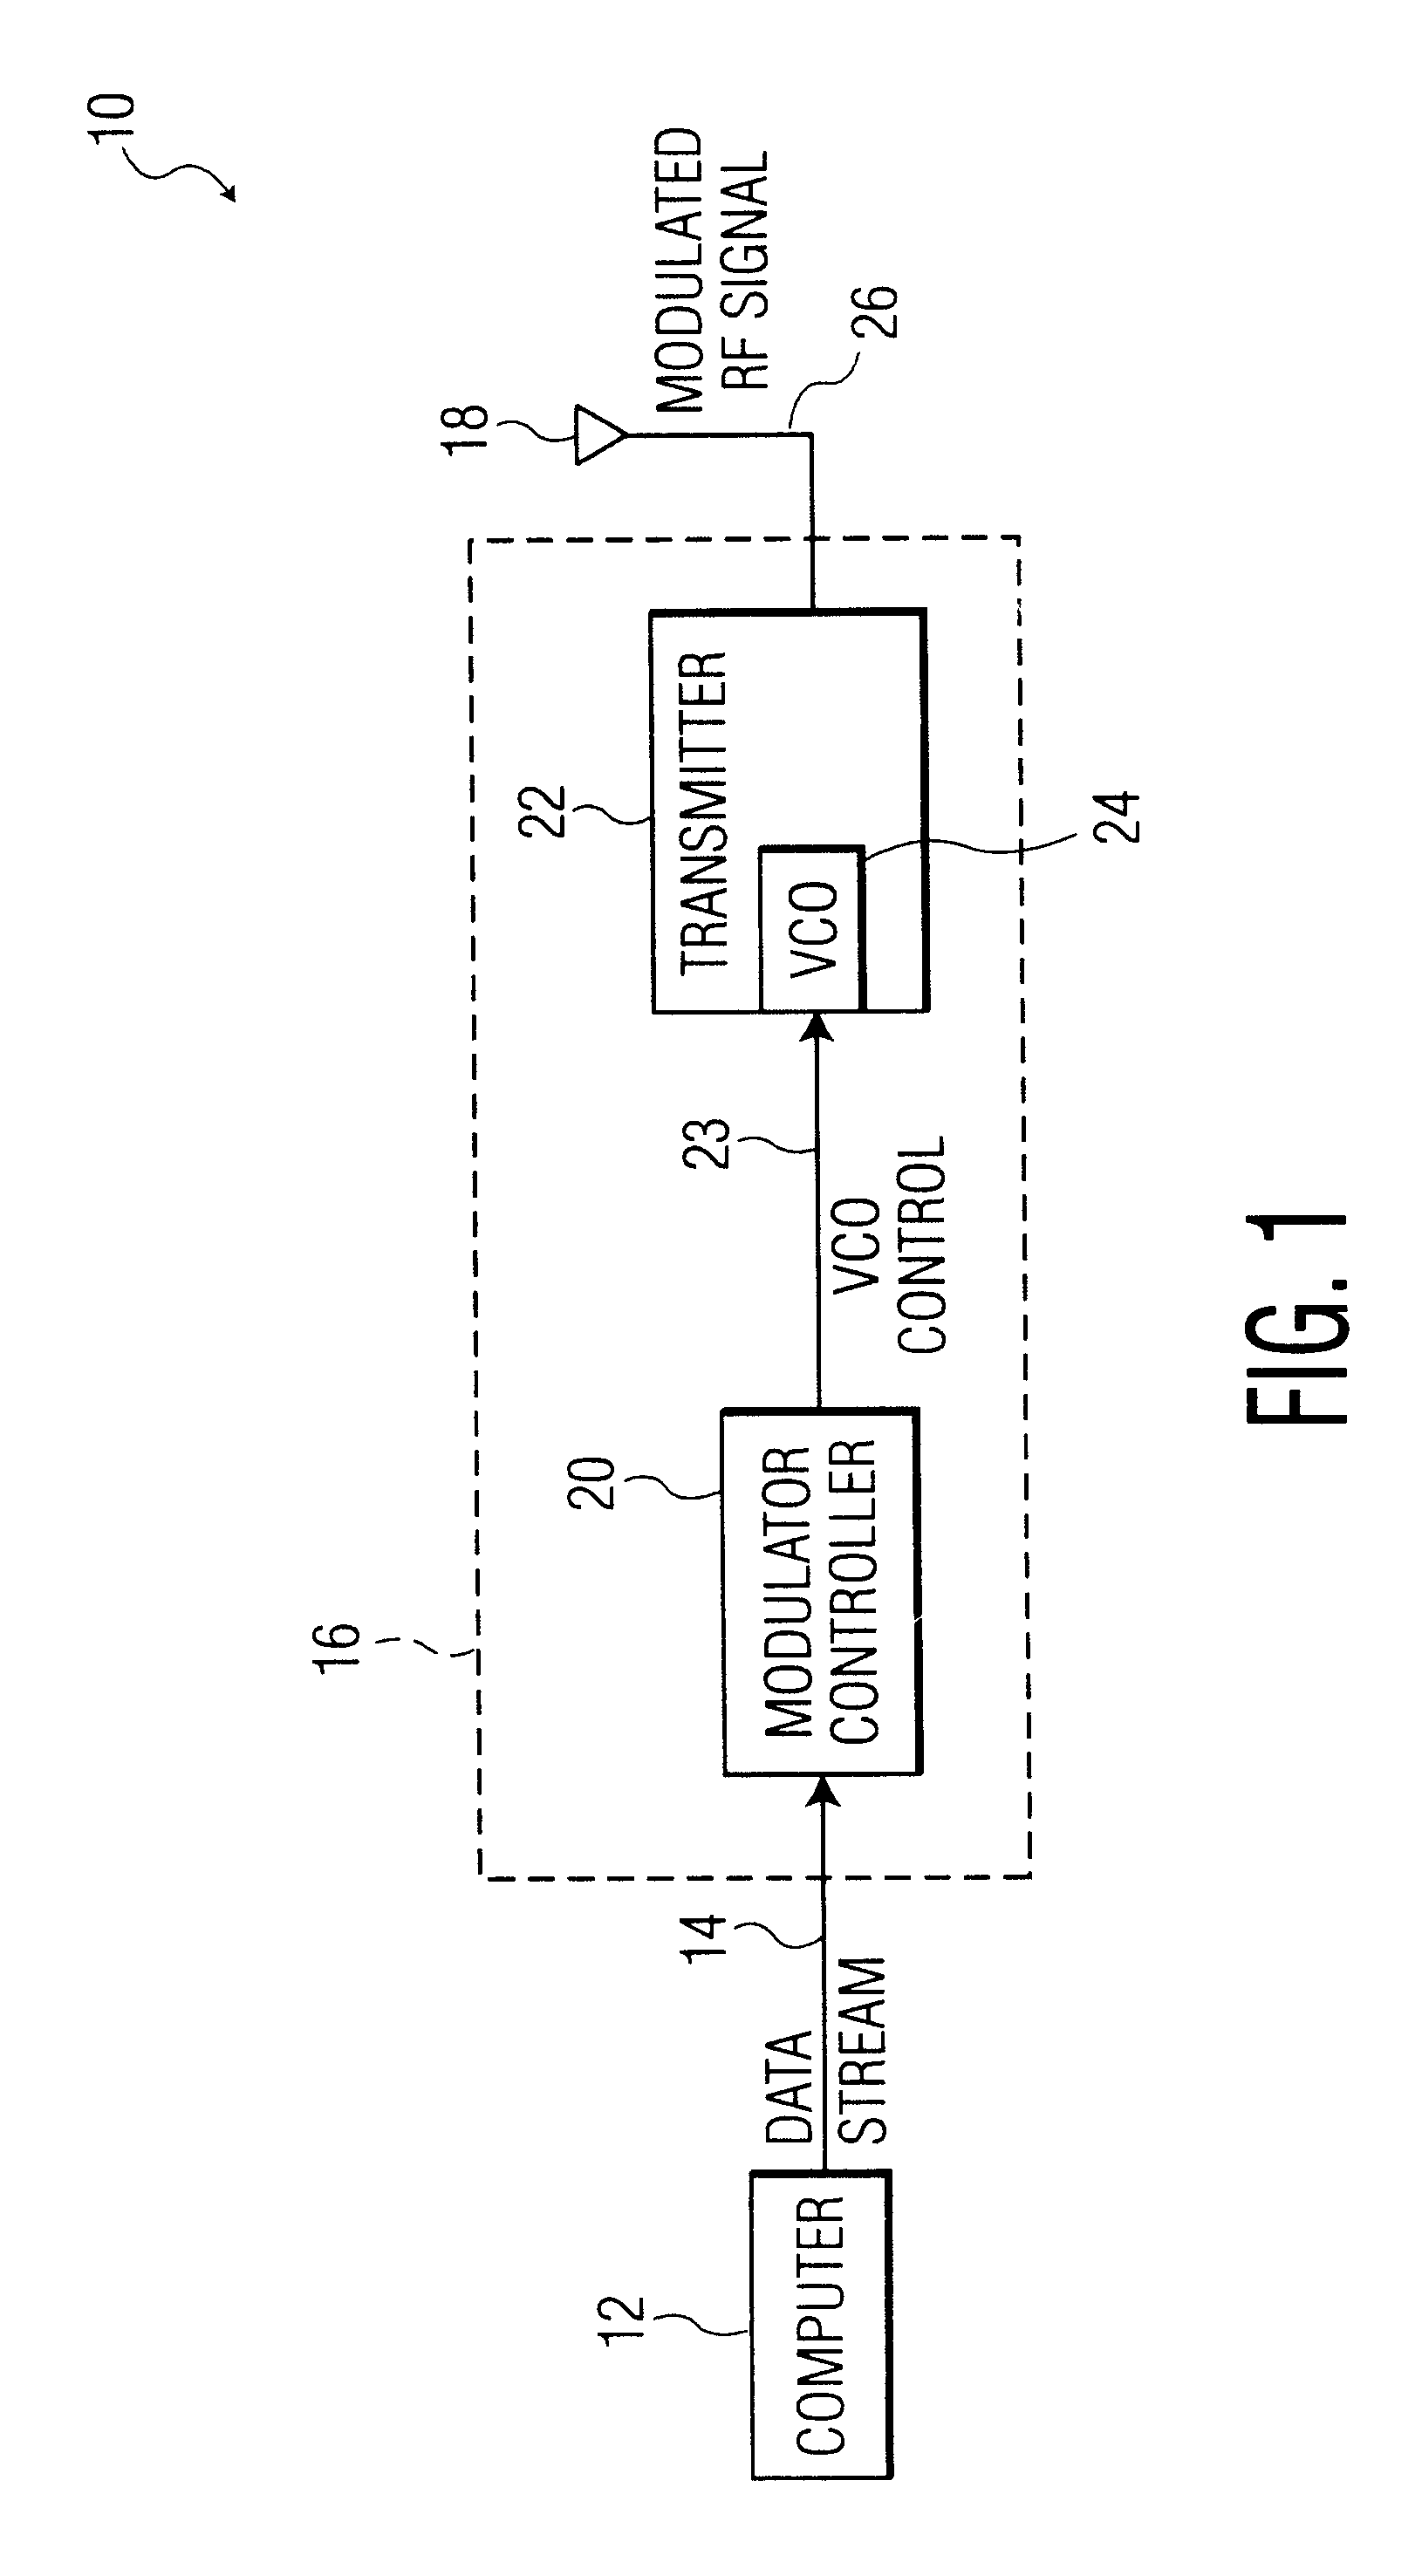 Method and apparatus for VCO modulation in a communication system